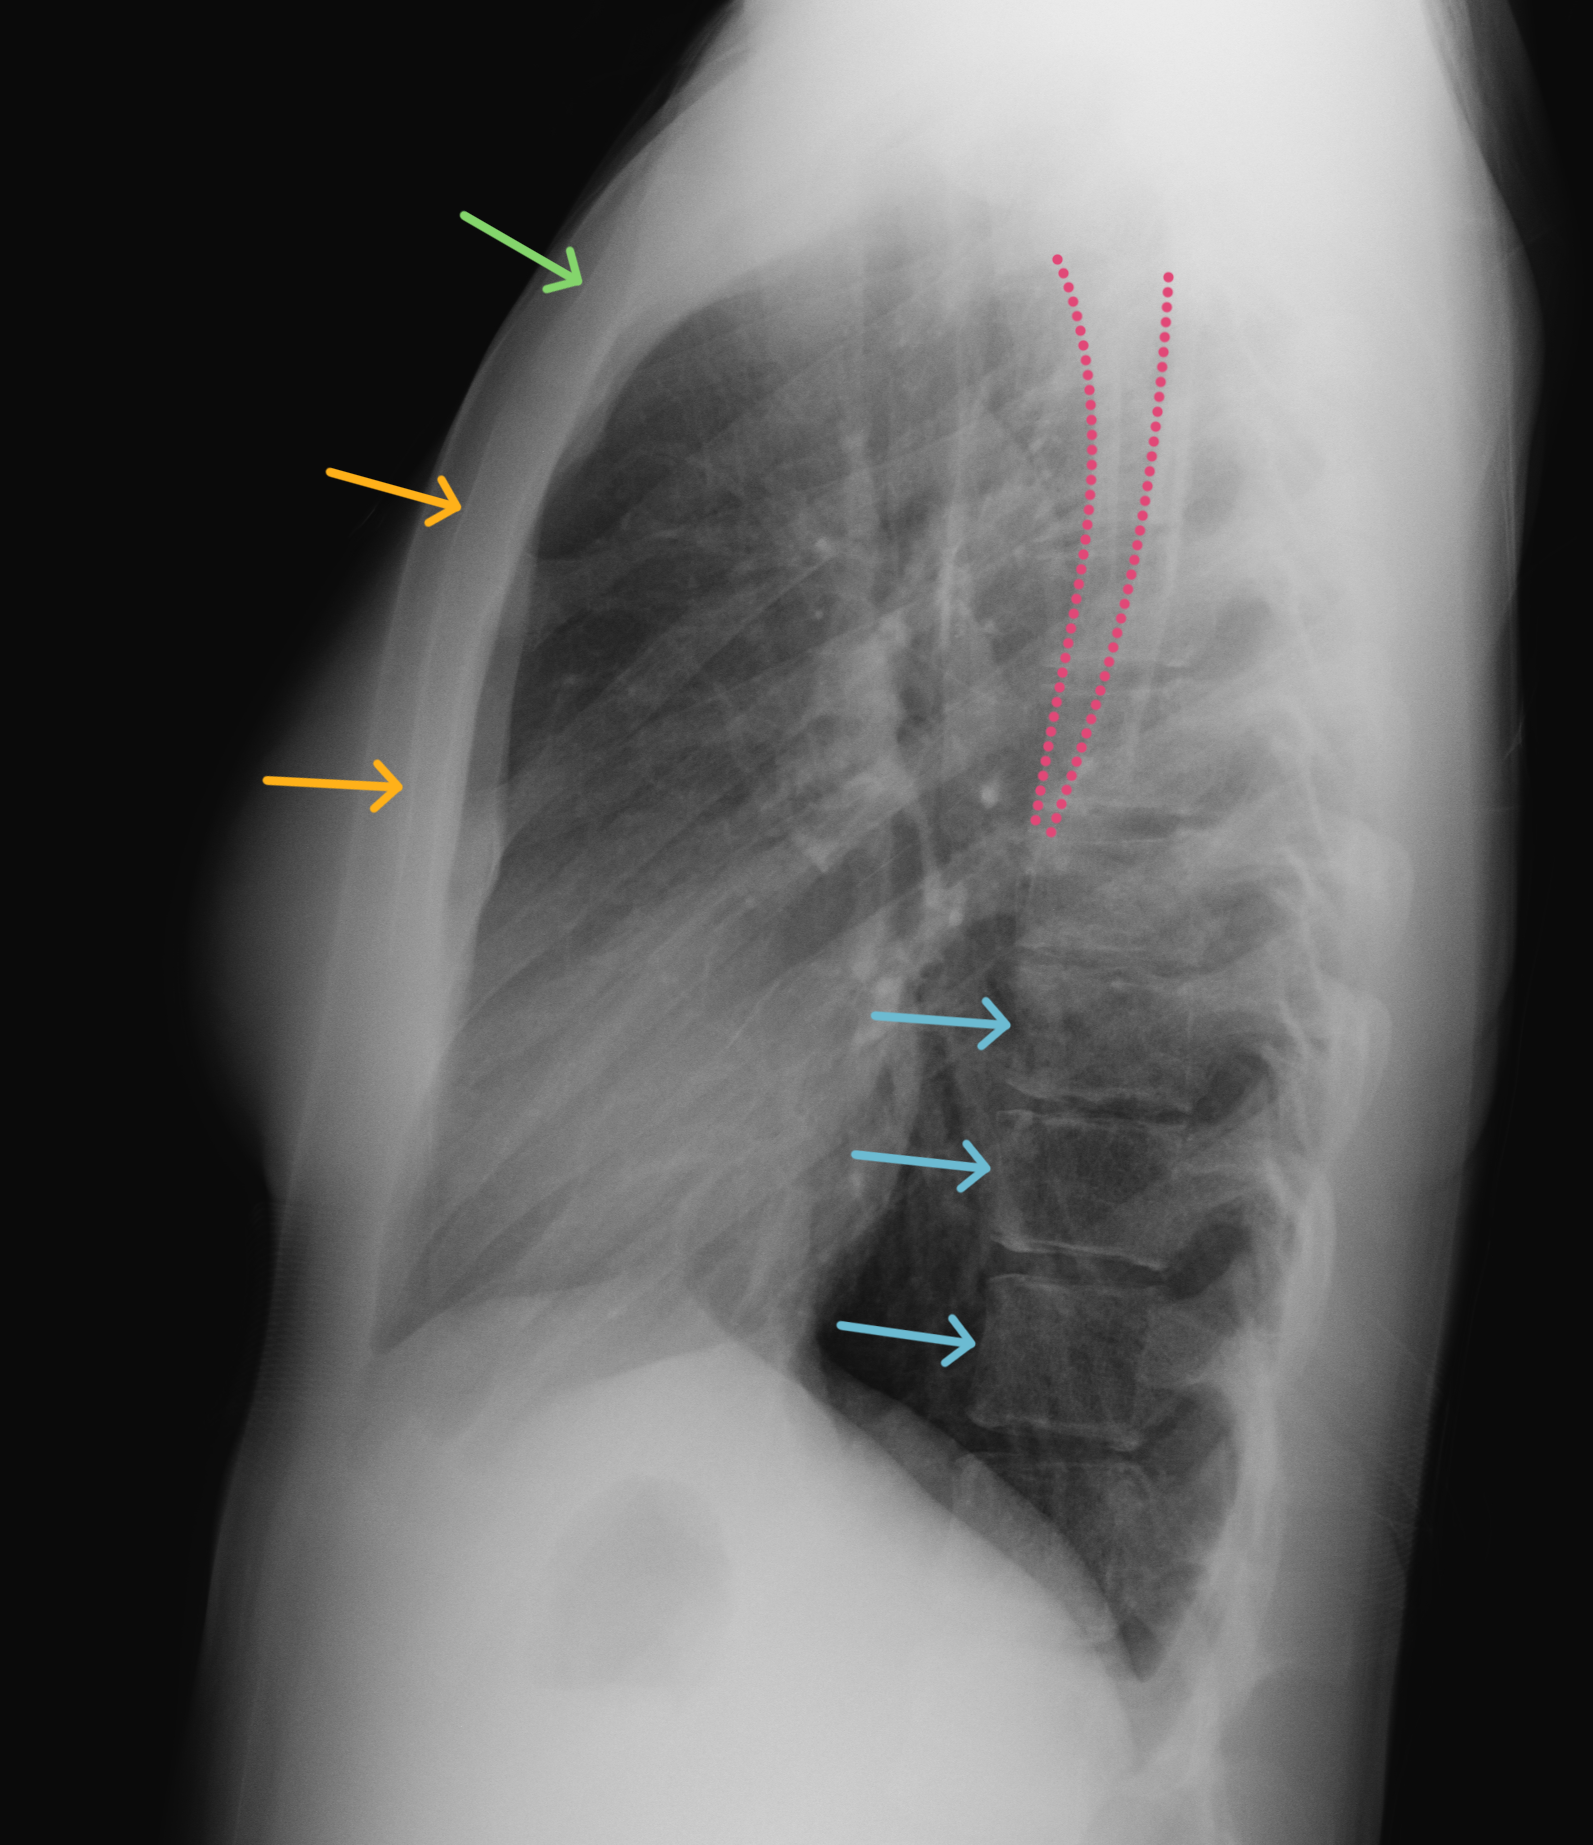 CaseStacks.com - Chest X-Ray Anatomy for Medical Students